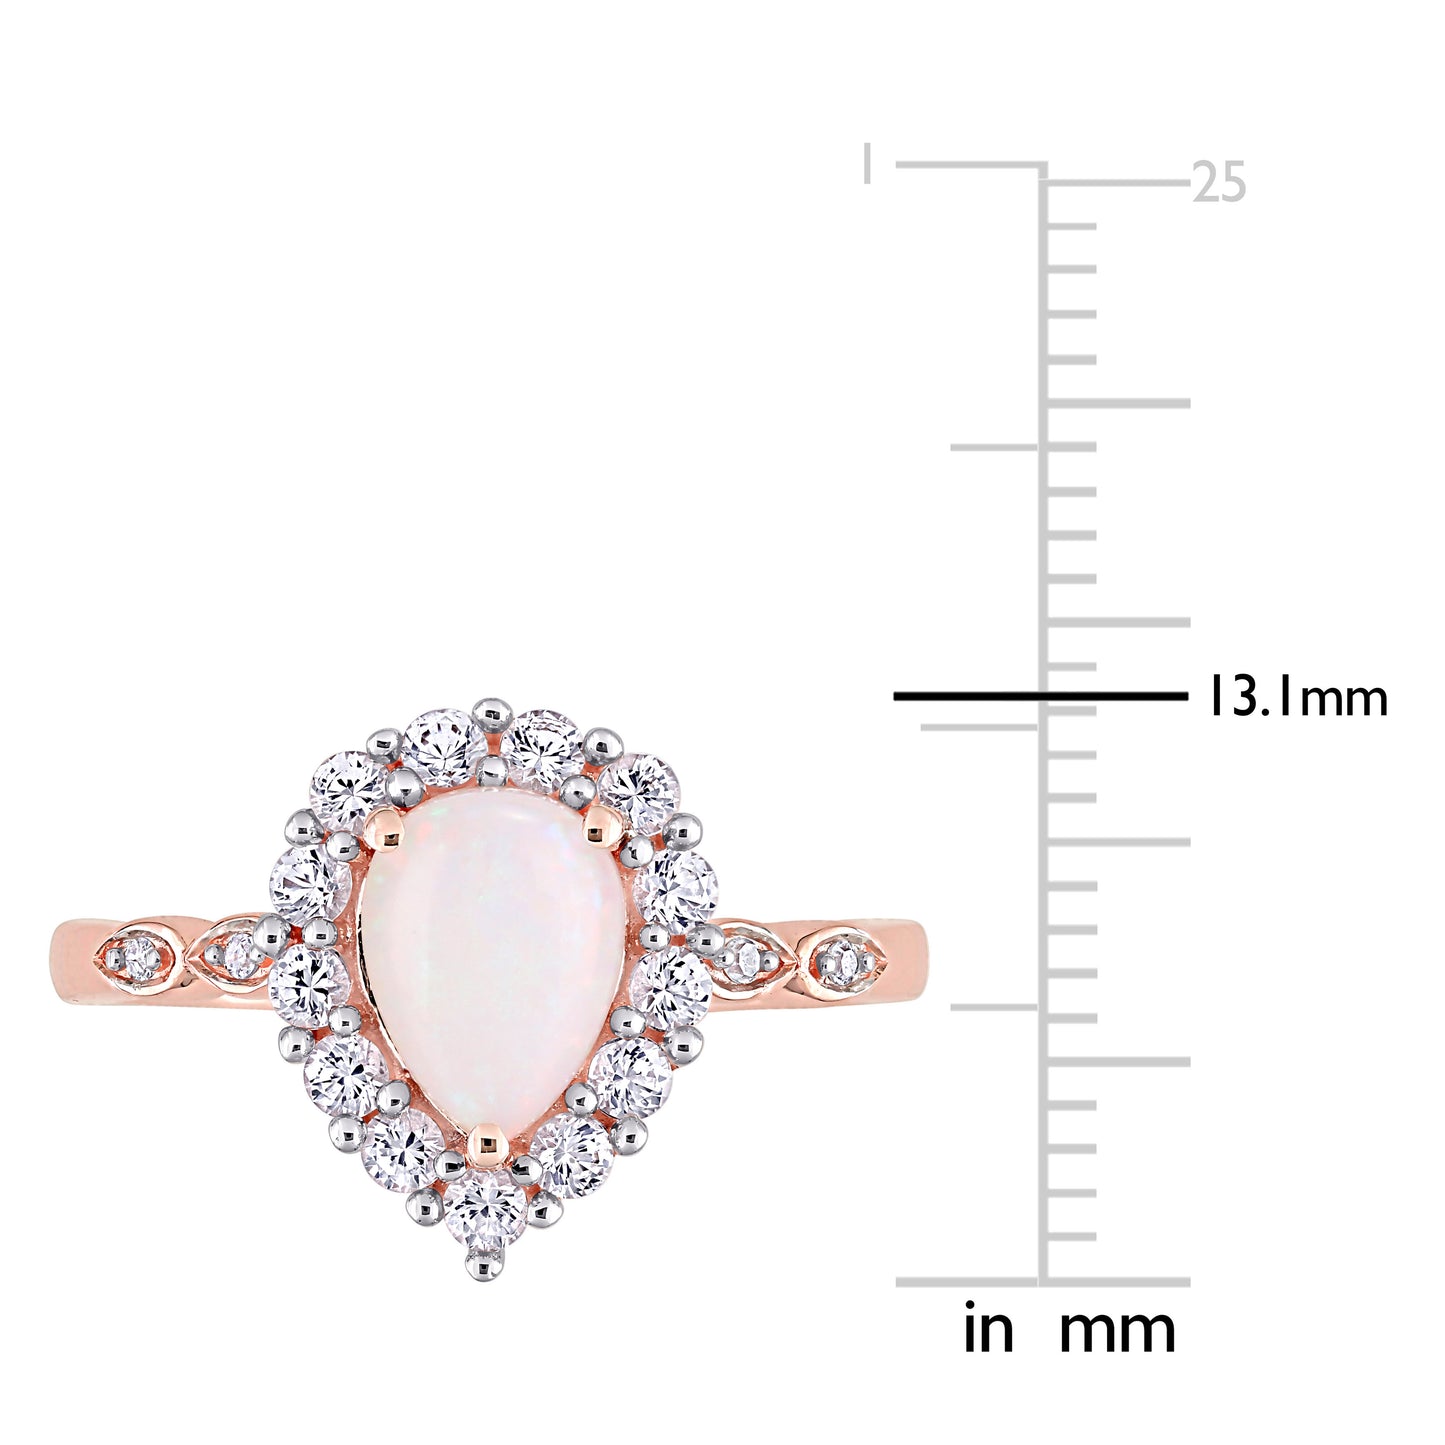 Opal White Sapphire & Diamond Pear Halo Ring in 10k Rose Gold